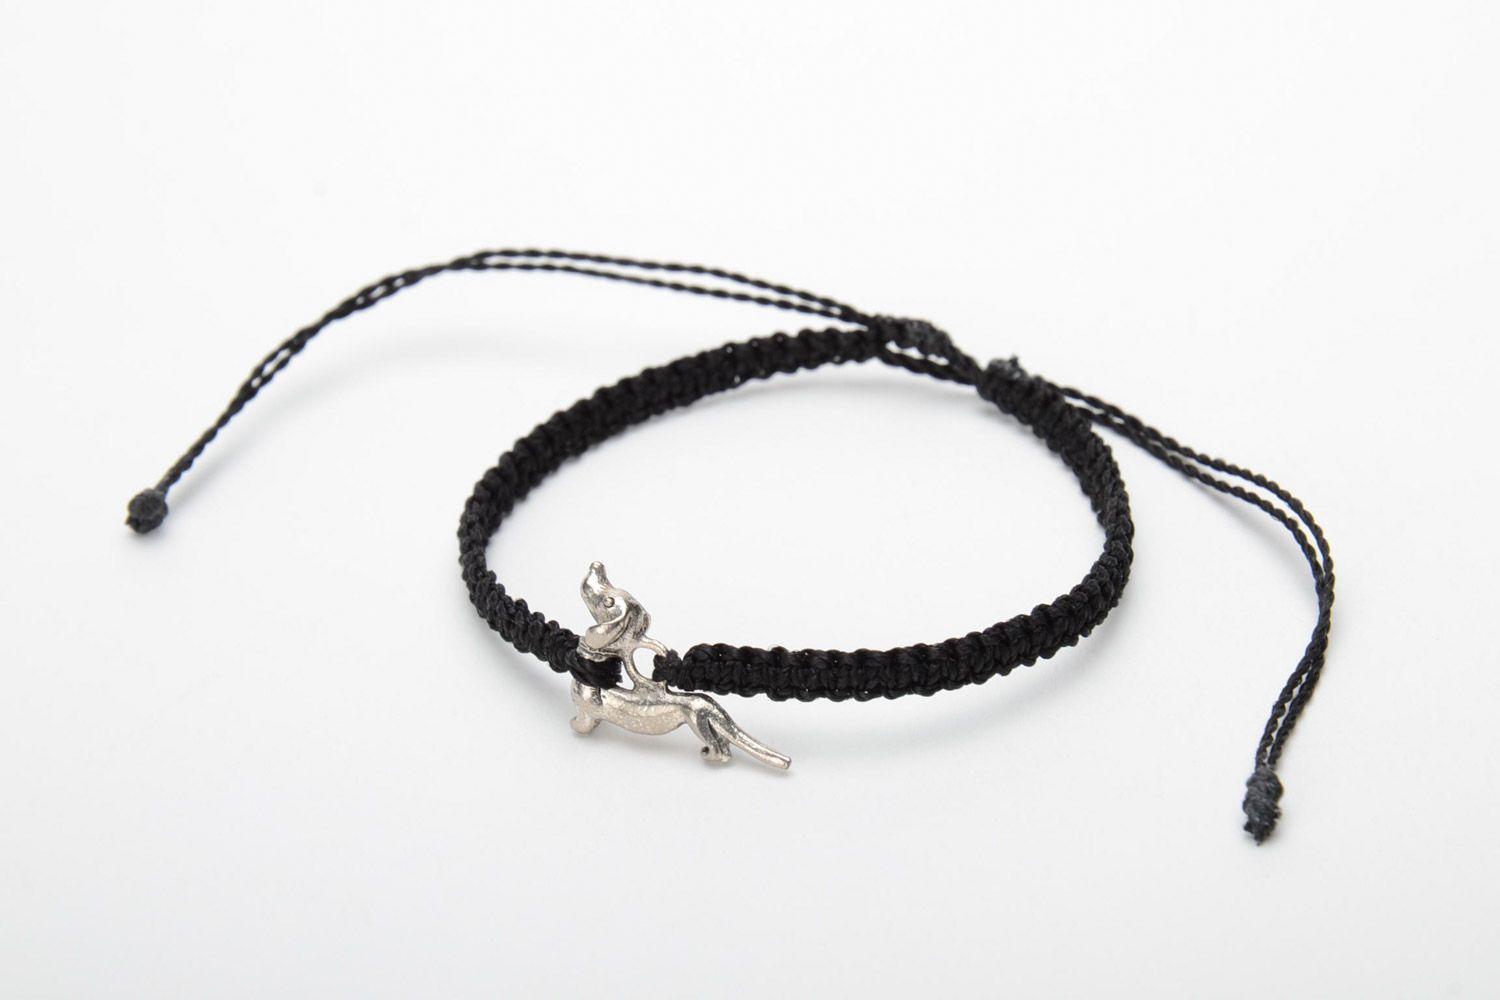 Handmade friendship bracelet woven of gray threads with a badger-dog charm photo 3